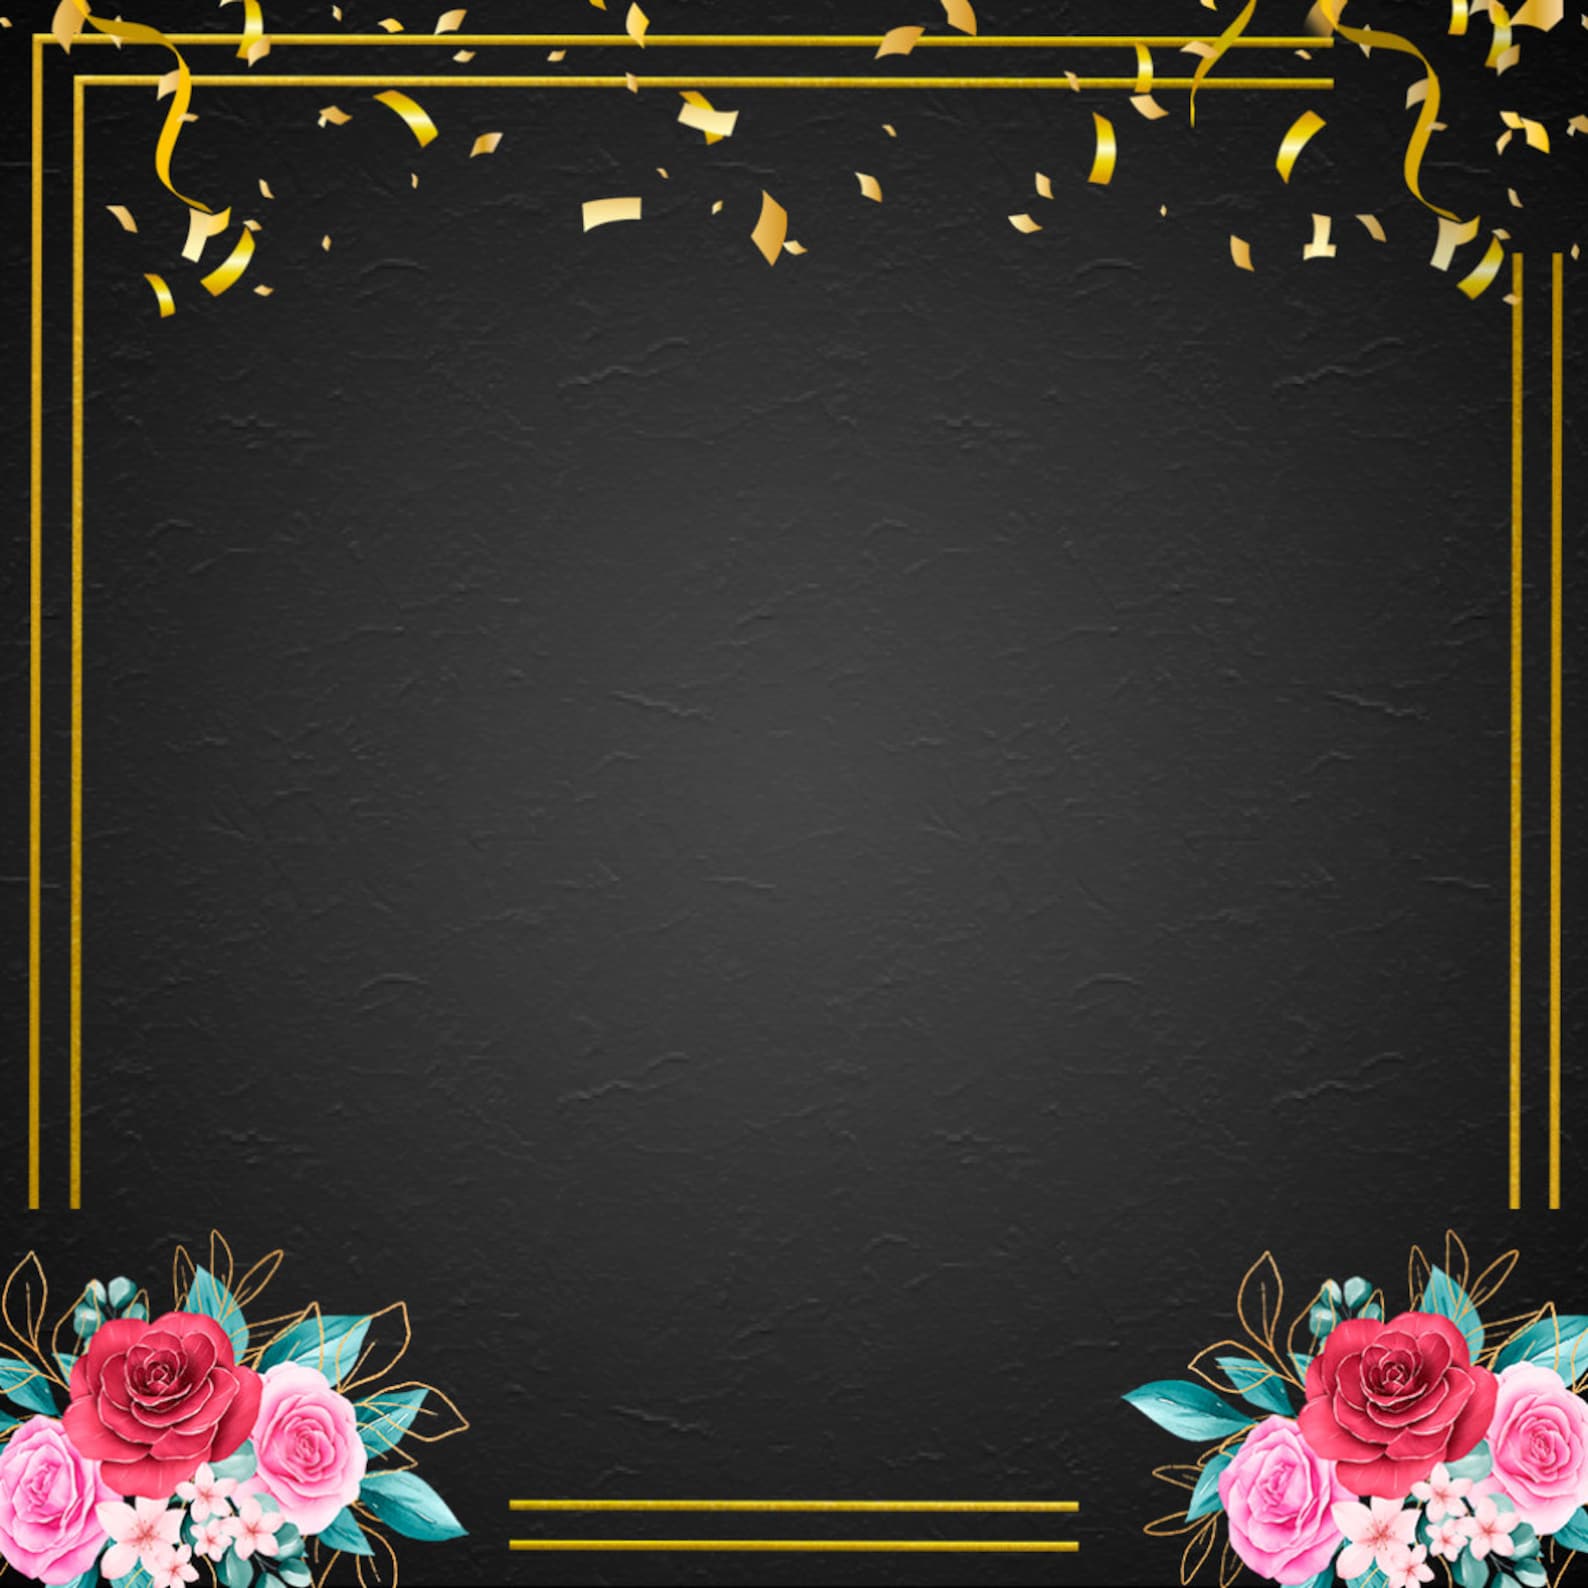 360 Booth Photo Template Flower 360 Golden Booth Overlay 360 Etsy